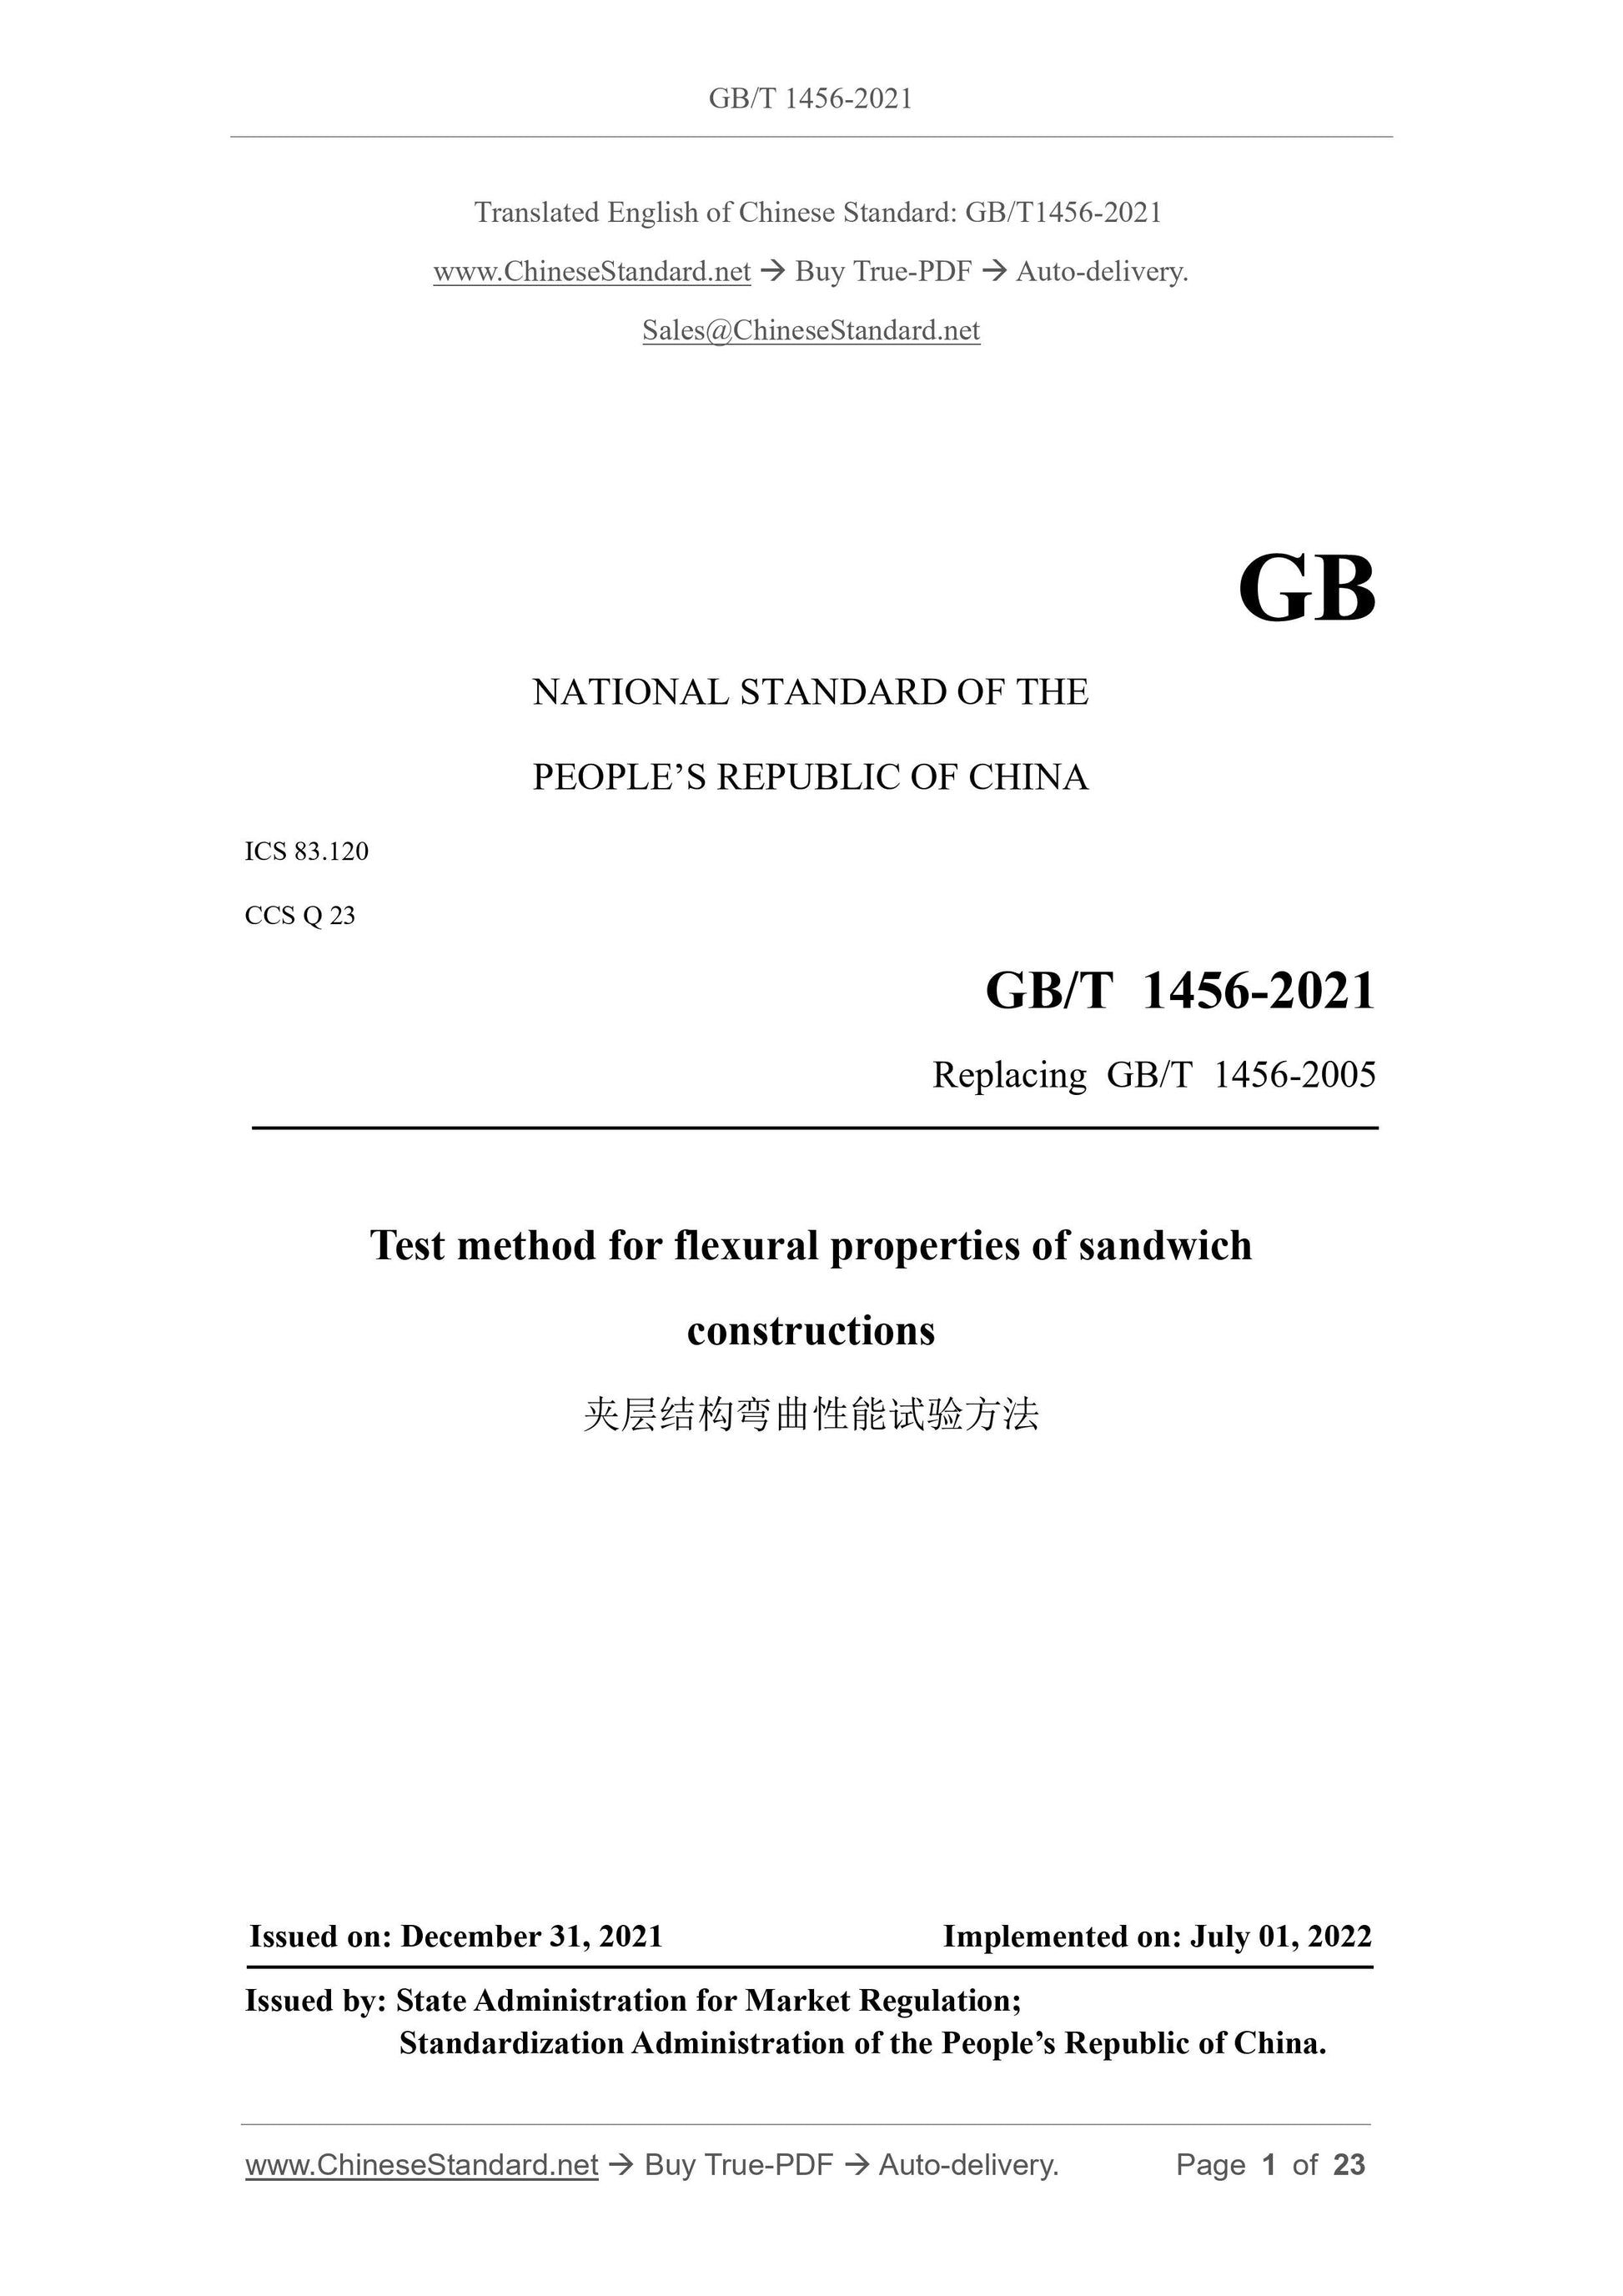 GB/T 1456-2021 Page 1